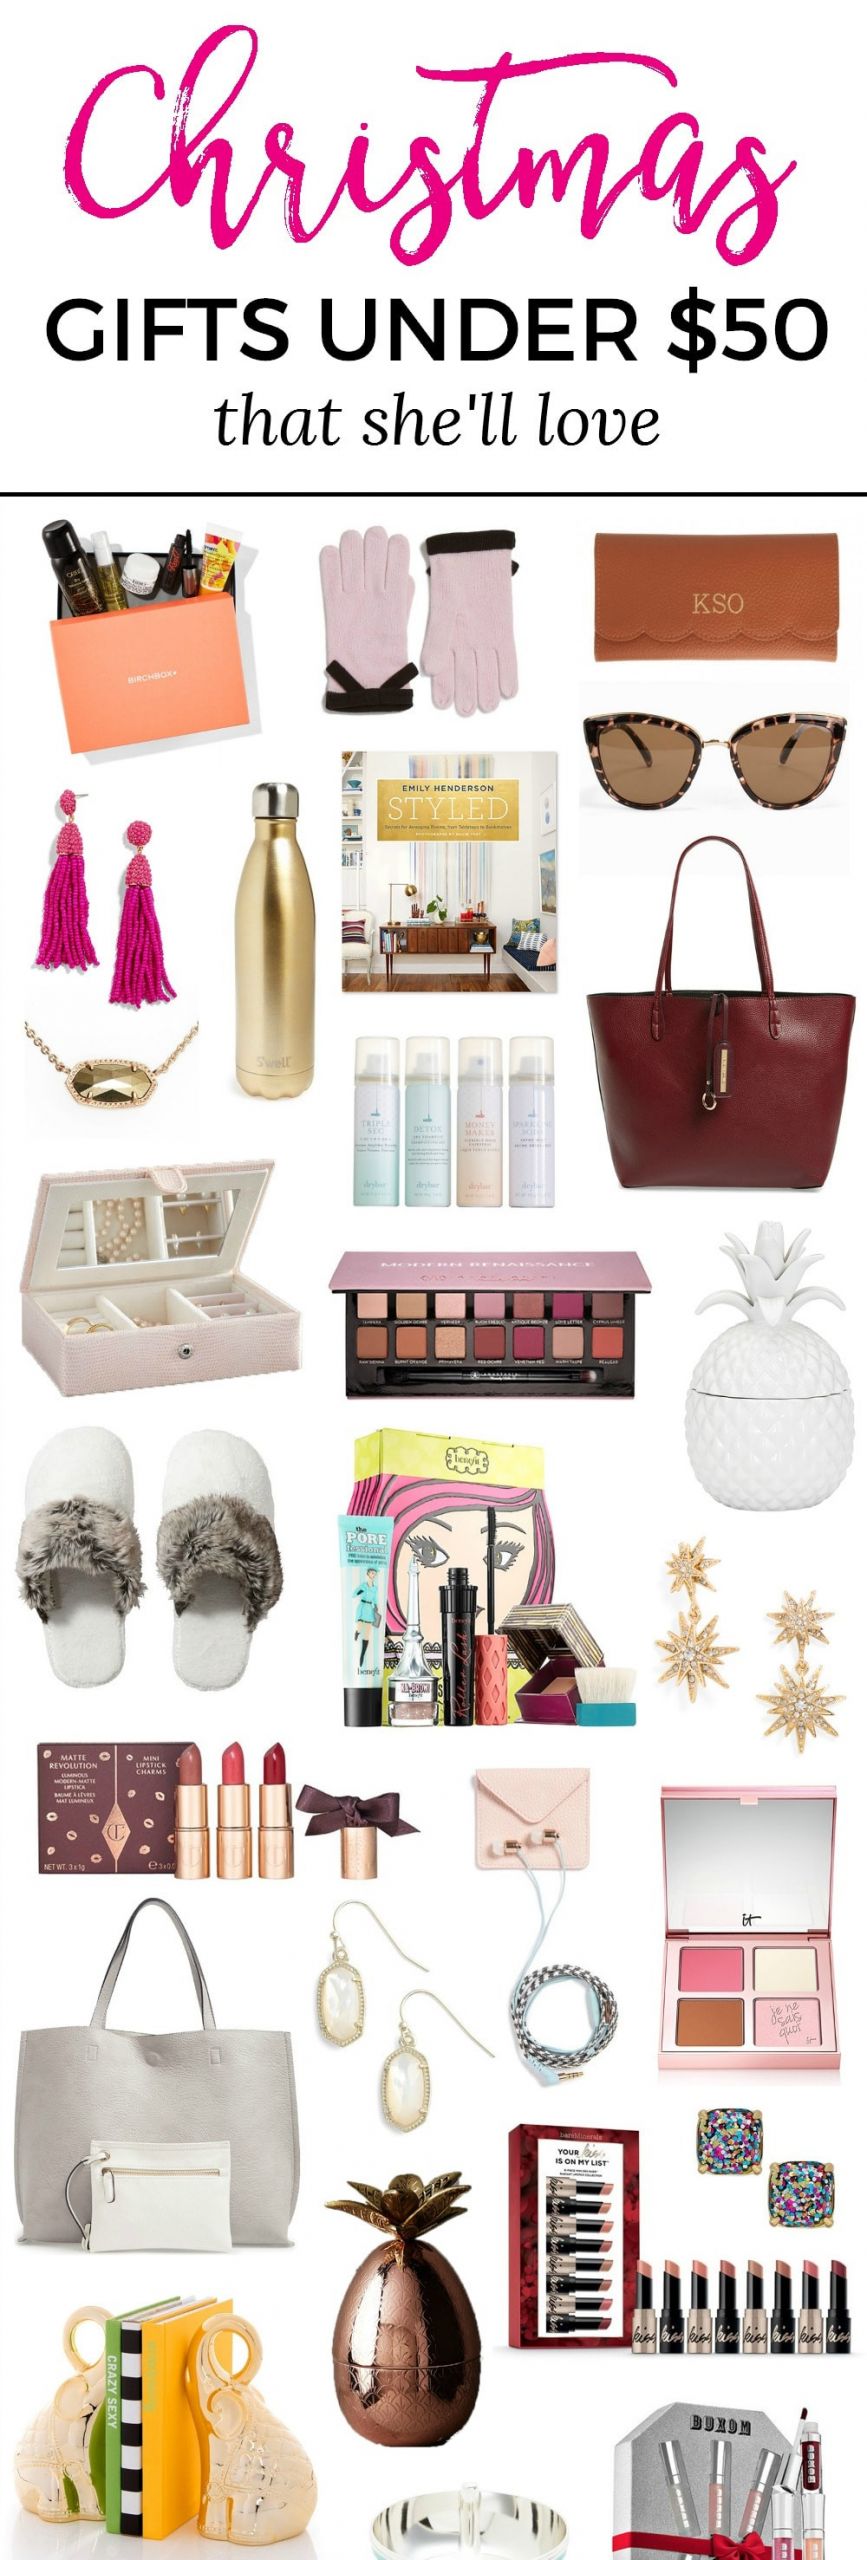 Holiday Gift Ideas For Women
 The Best Christmas Gift Ideas for Women under $50